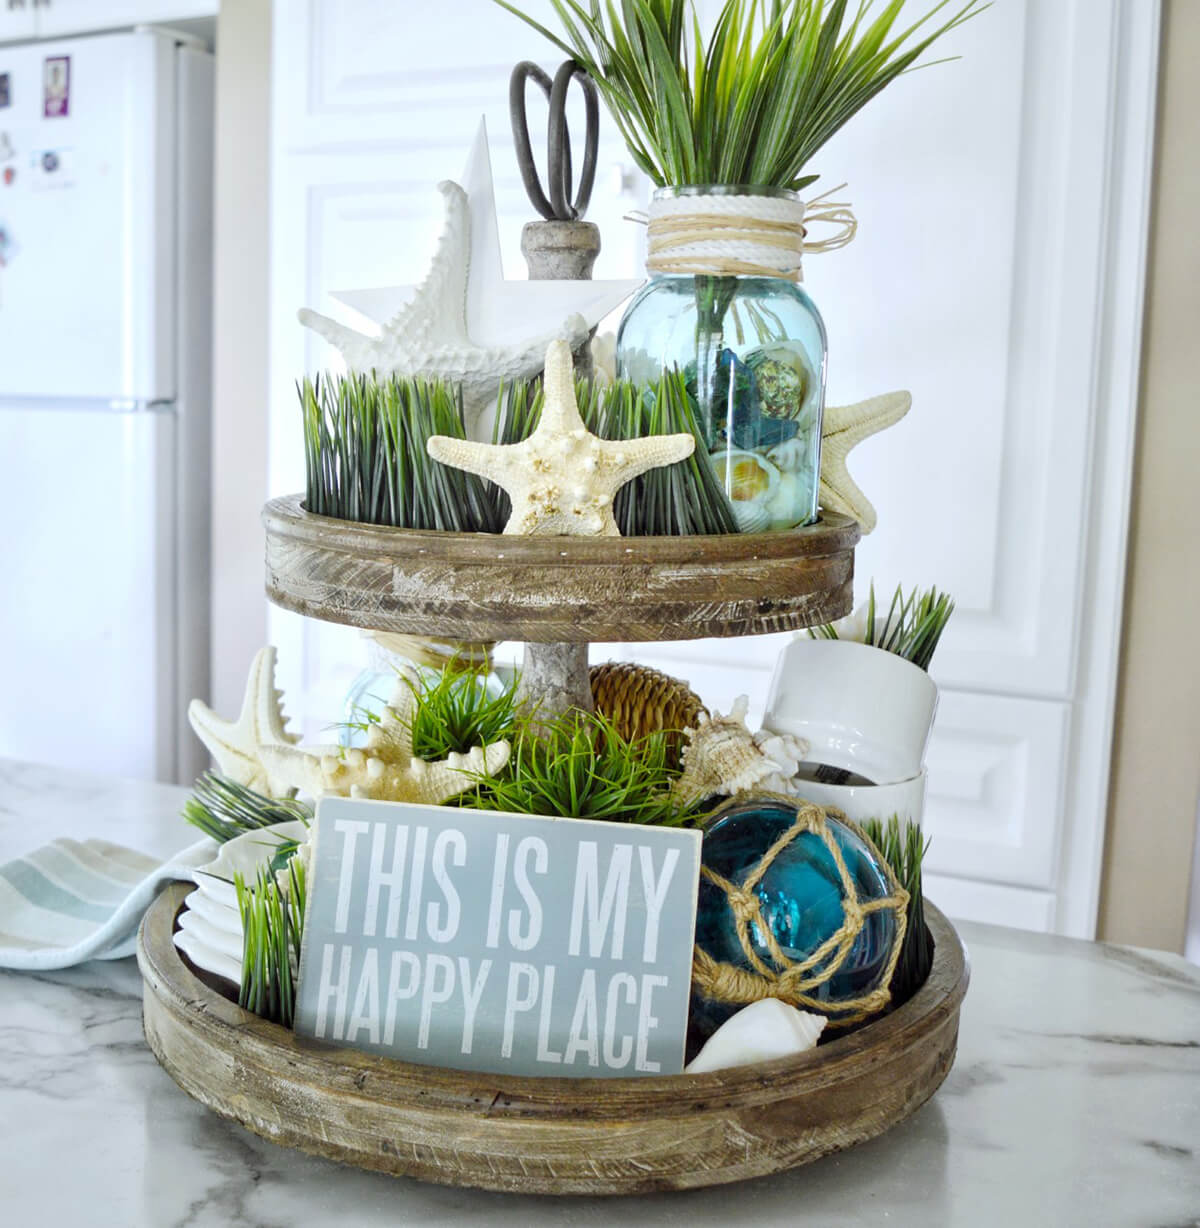 Tiered Tray for Pretty Storage and Home Organization with Happy Place Sign